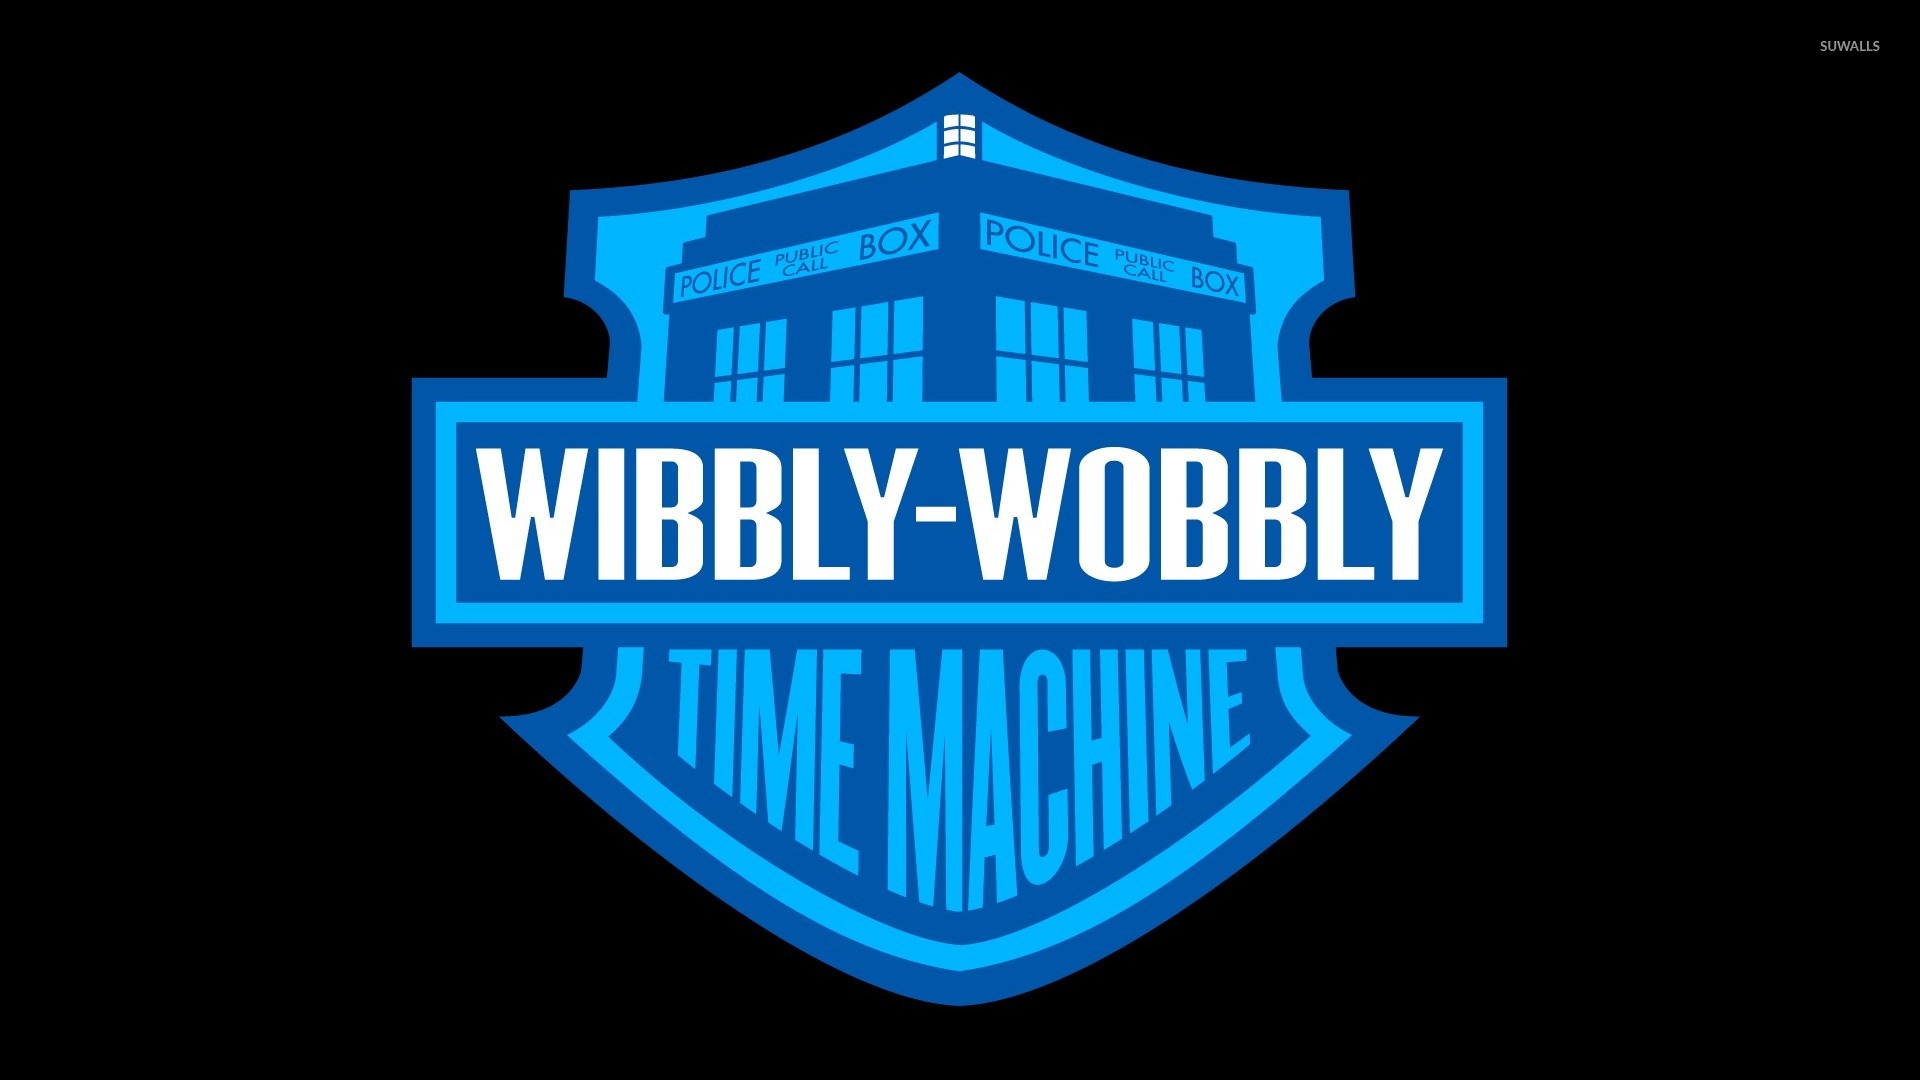 Wibbly Wobbly Time Machine Wallpaper Vector